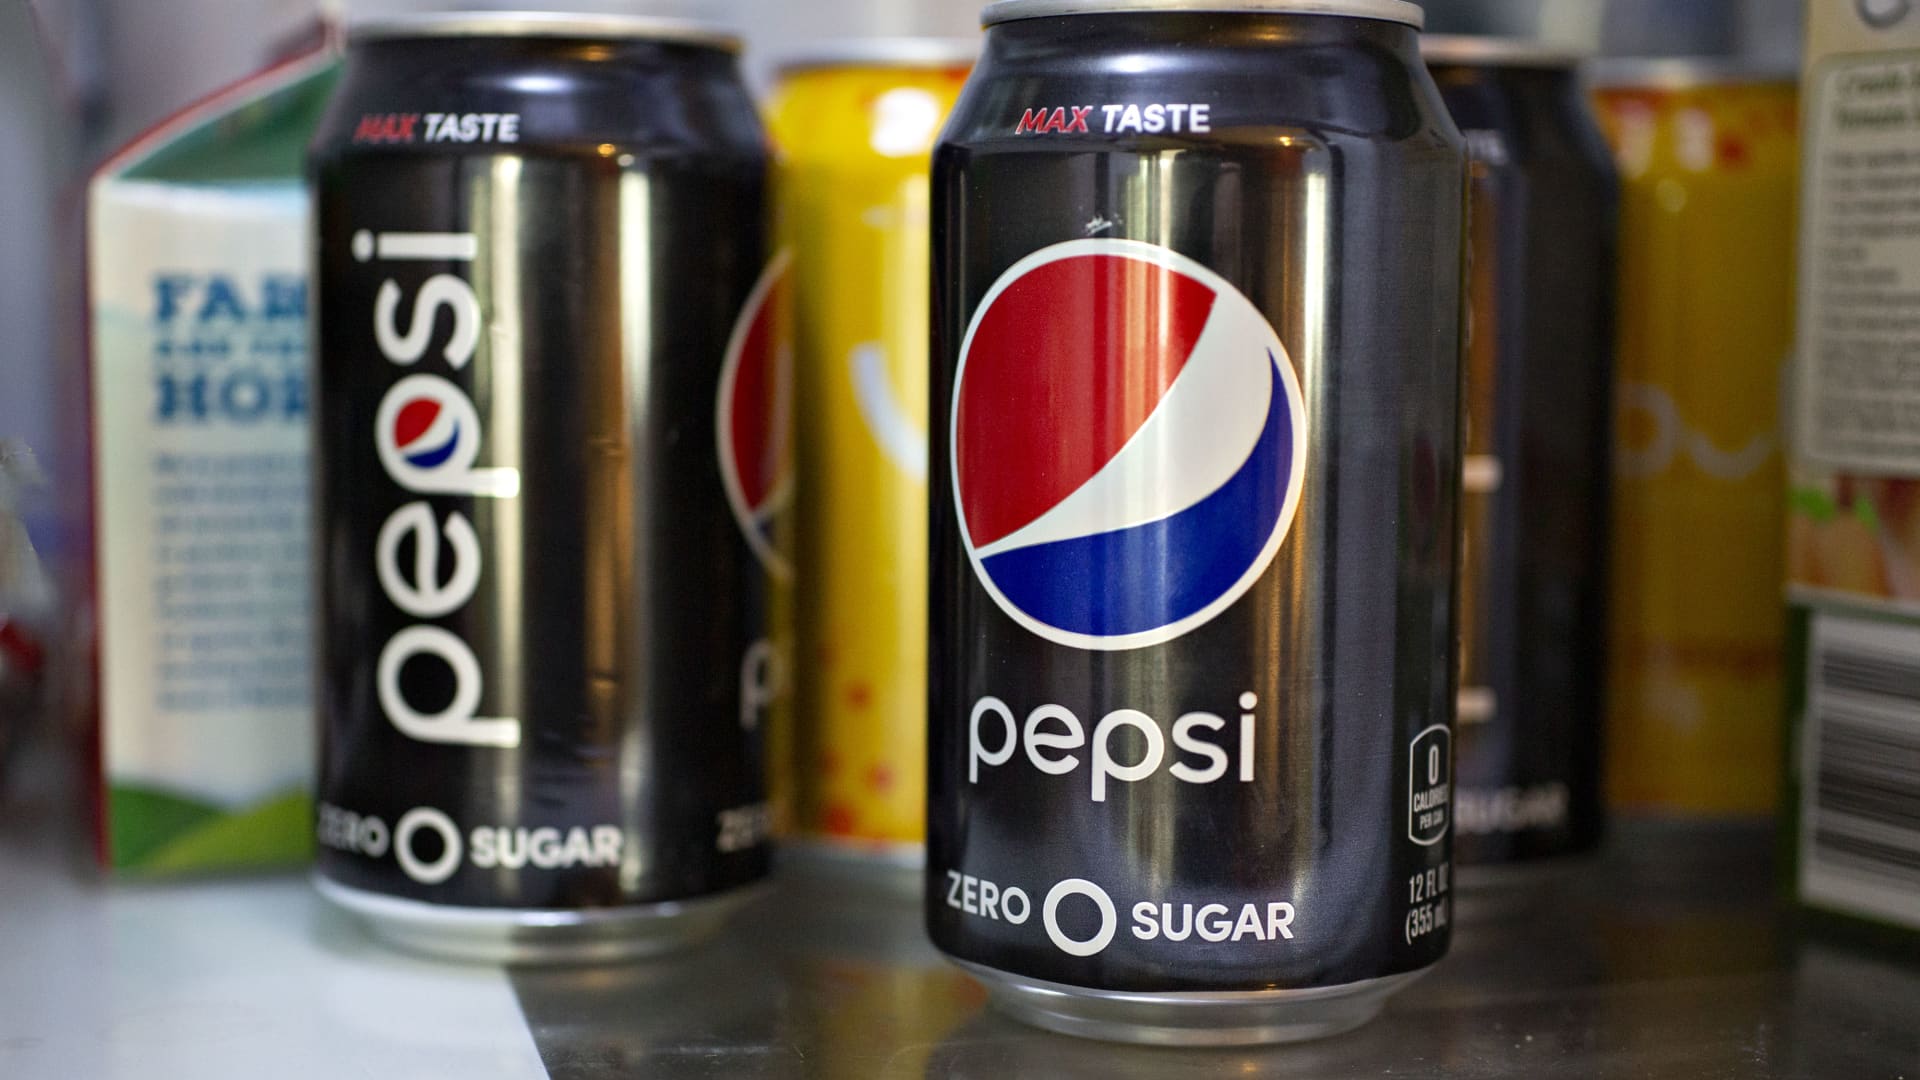 FDA says aspartame is safe, disagrees with WHO on possible cancer link